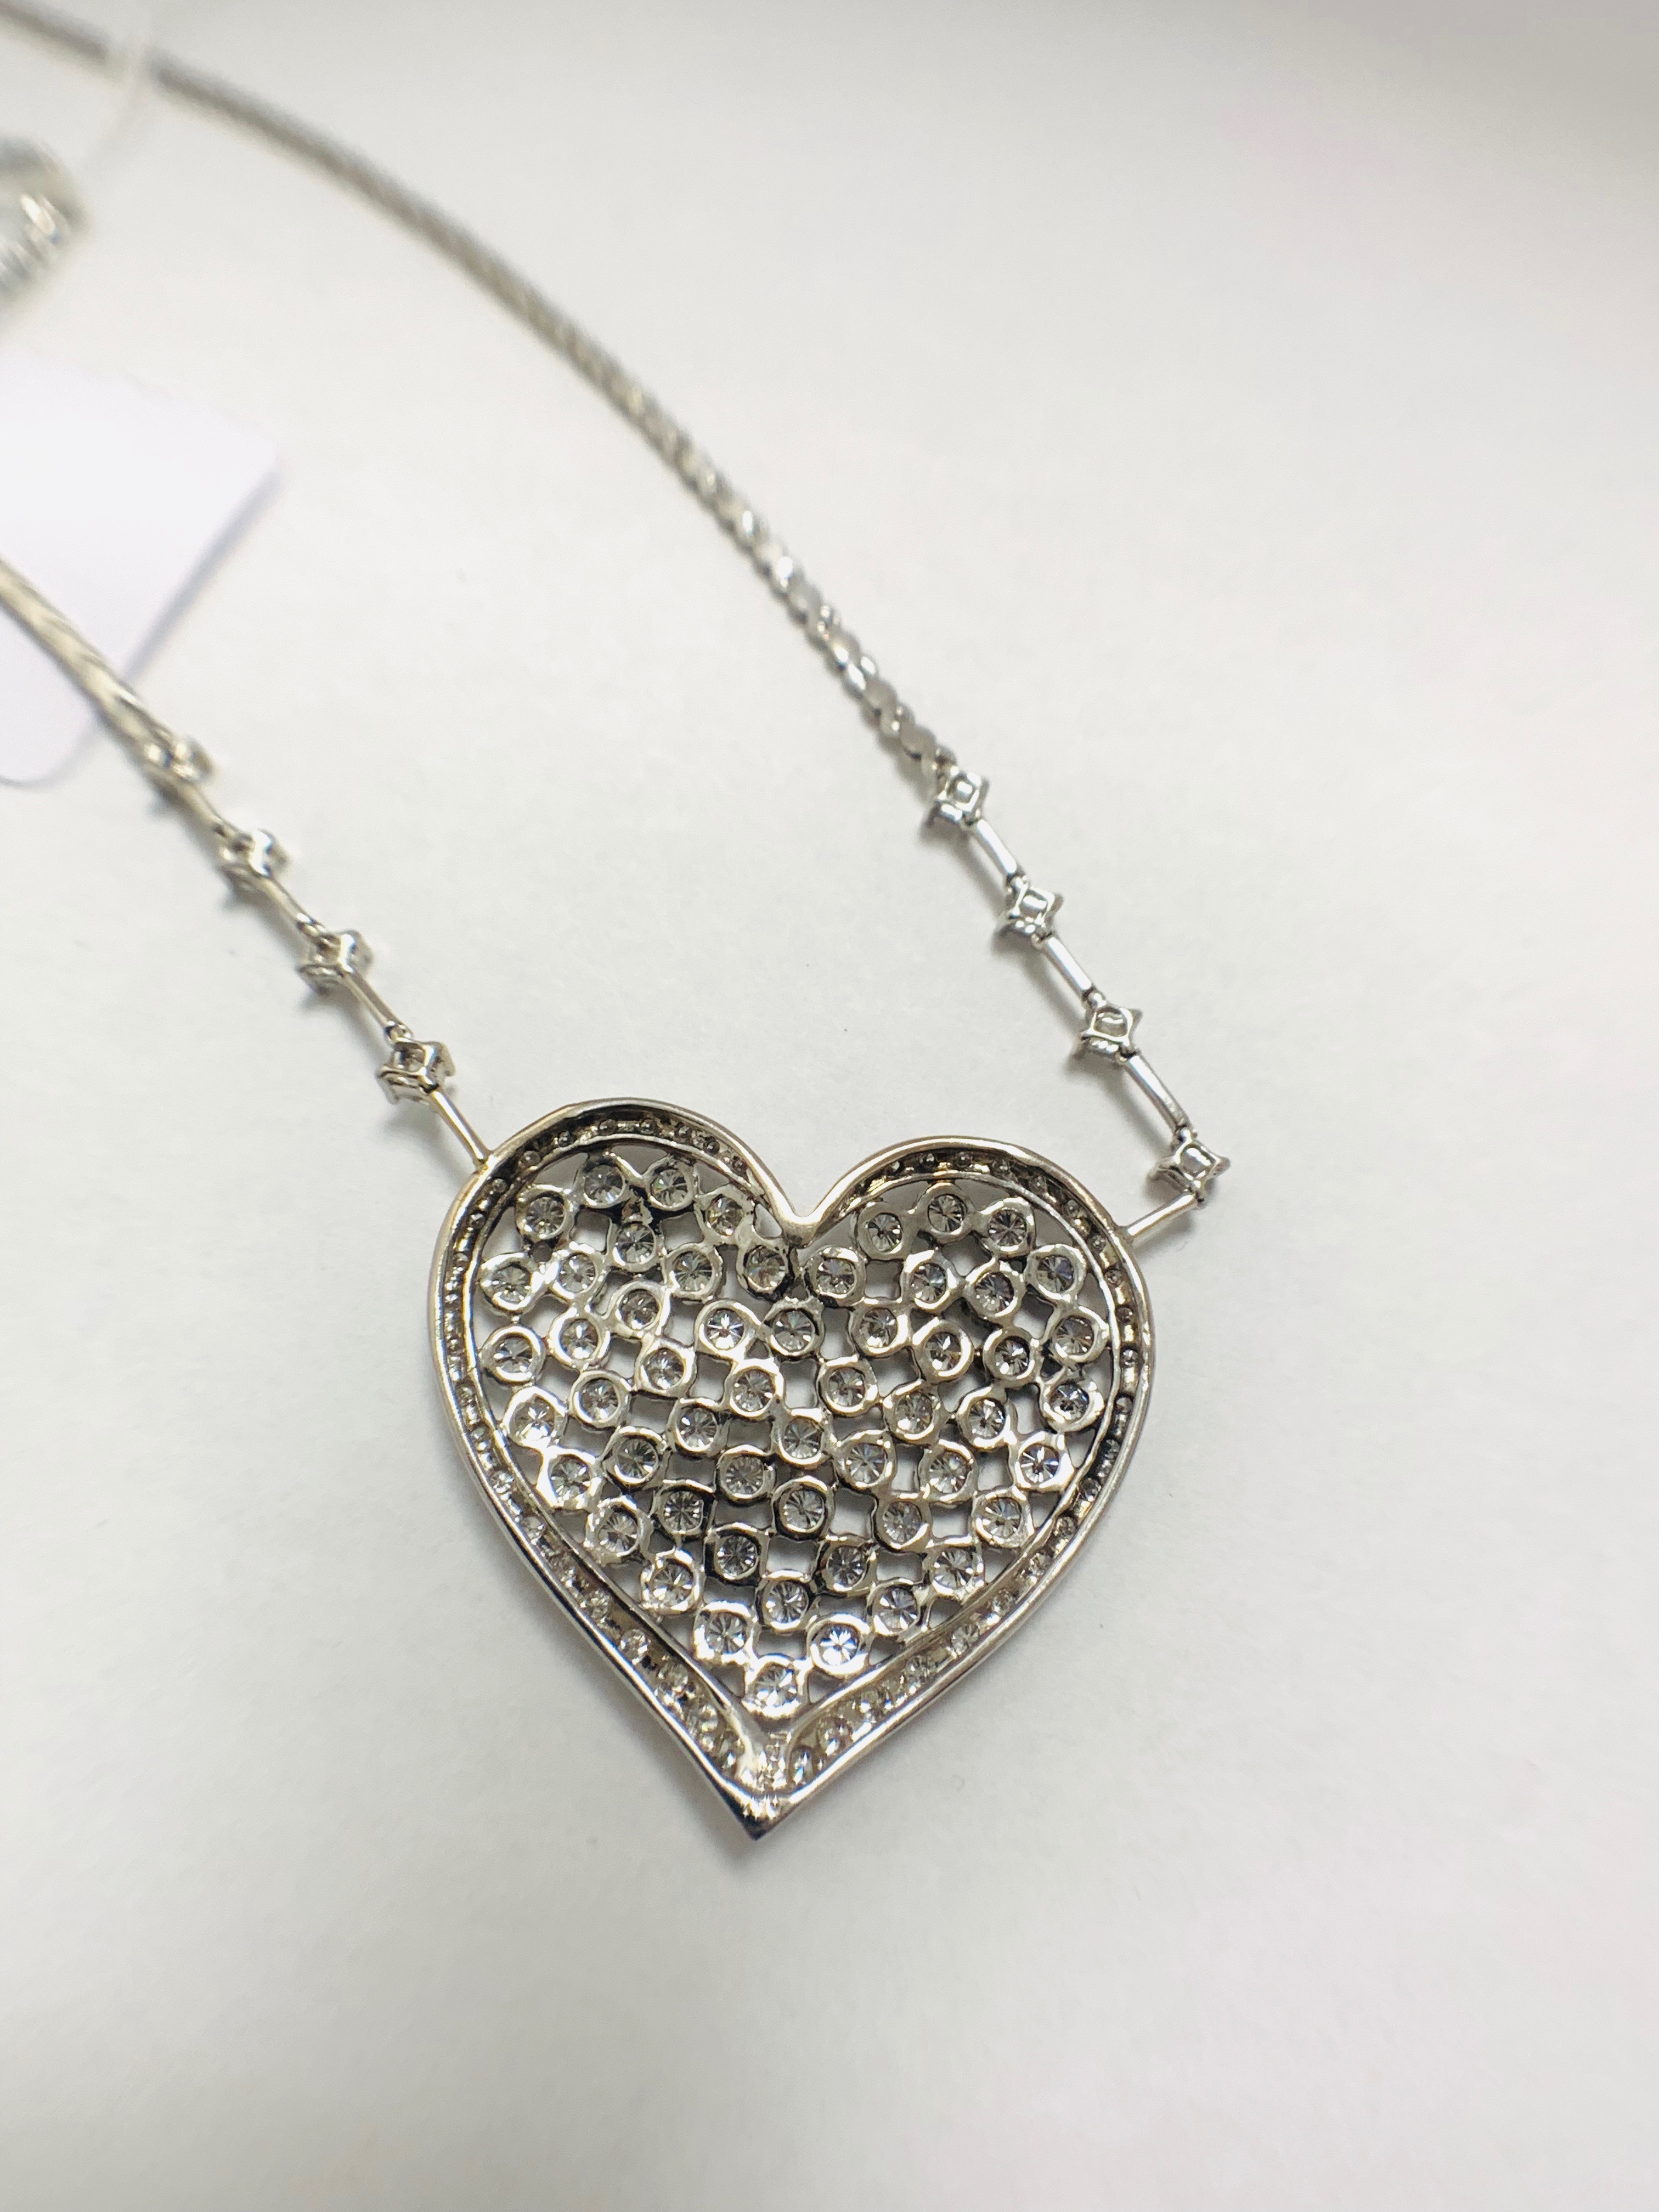 18ct White Gold Diamond Heart Necklace - Image 5 of 12